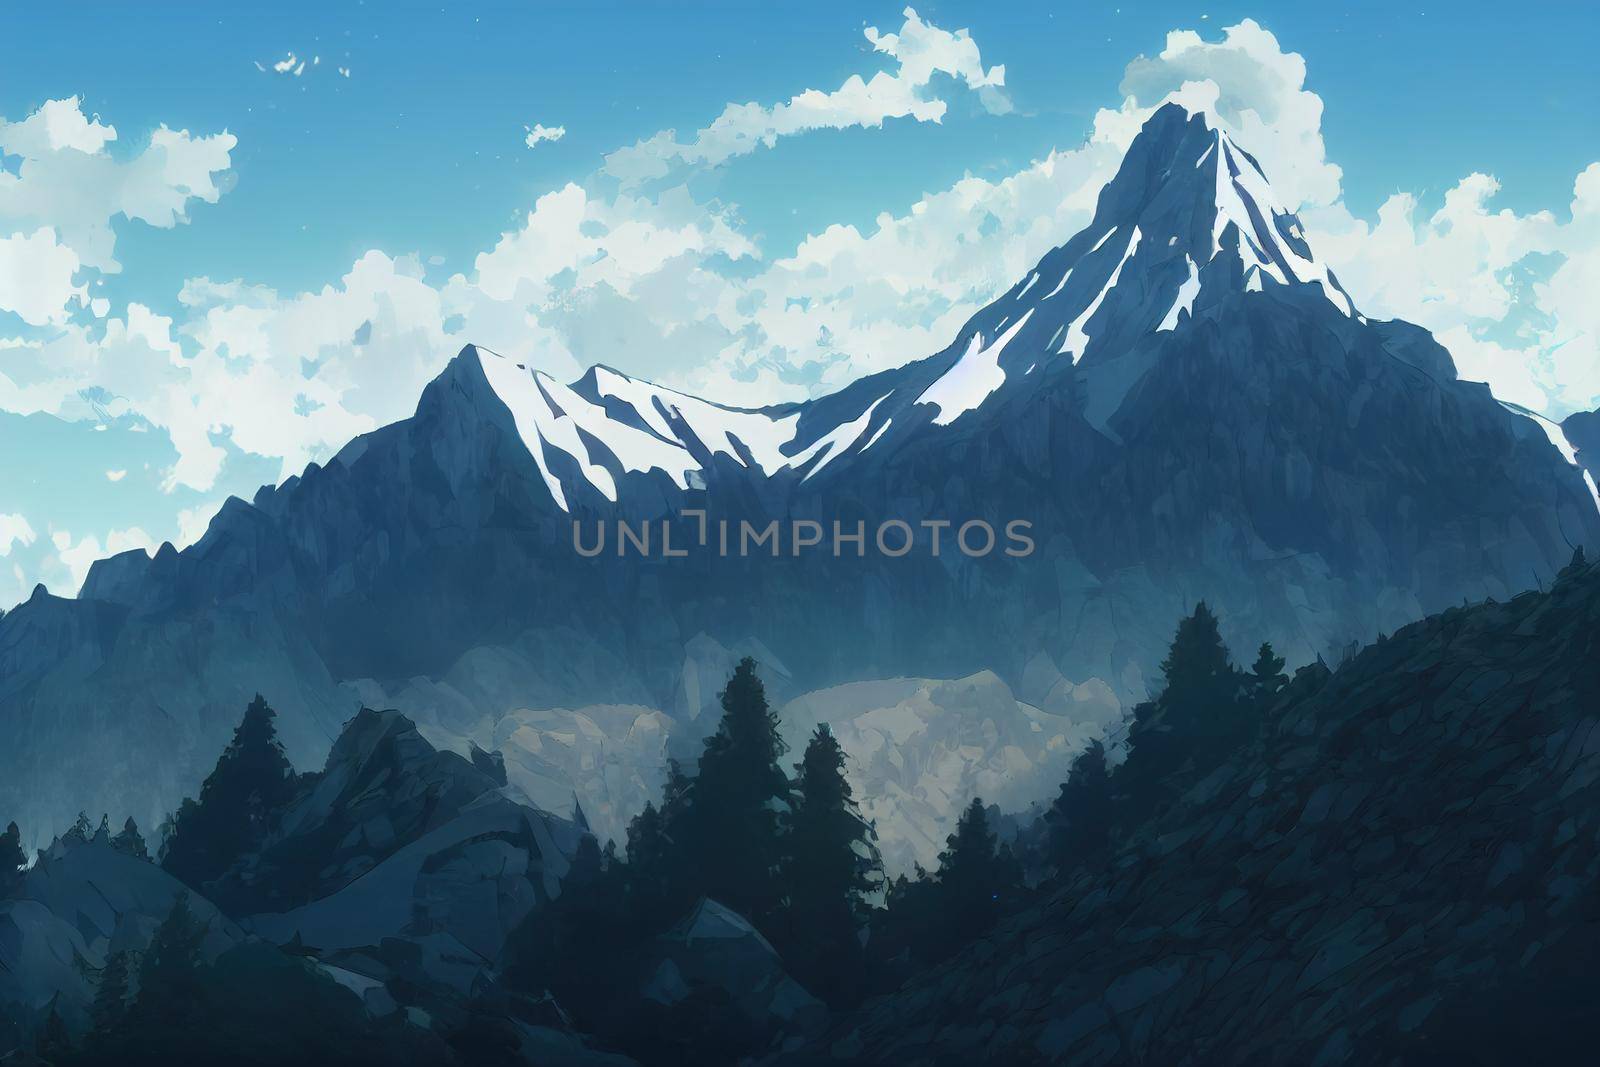 The mountain in the zugspitze arena, anime style, webtoon by 2ragon